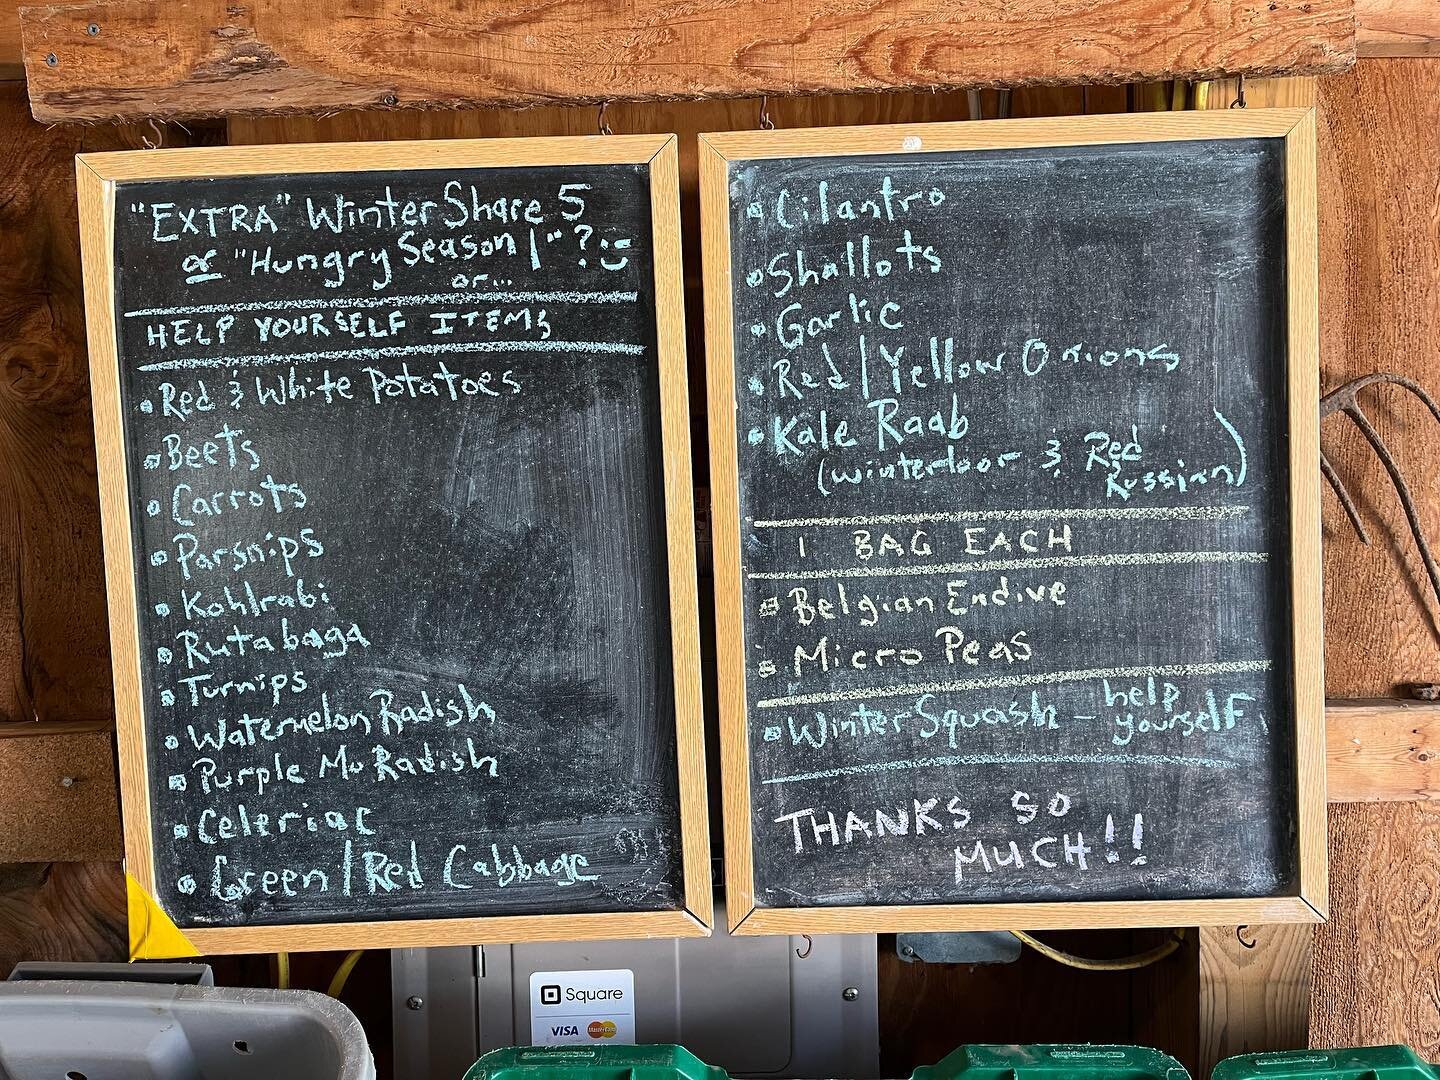 An &ldquo;Extra Winter Share&rdquo; a &ldquo;Hungry Season Share&rdquo; a we don&rsquo;t know what to call it share&hellip;but here it is in all its deliciousness!  Thanks!  #stonesthrowfarm #communitysupportedagriculture